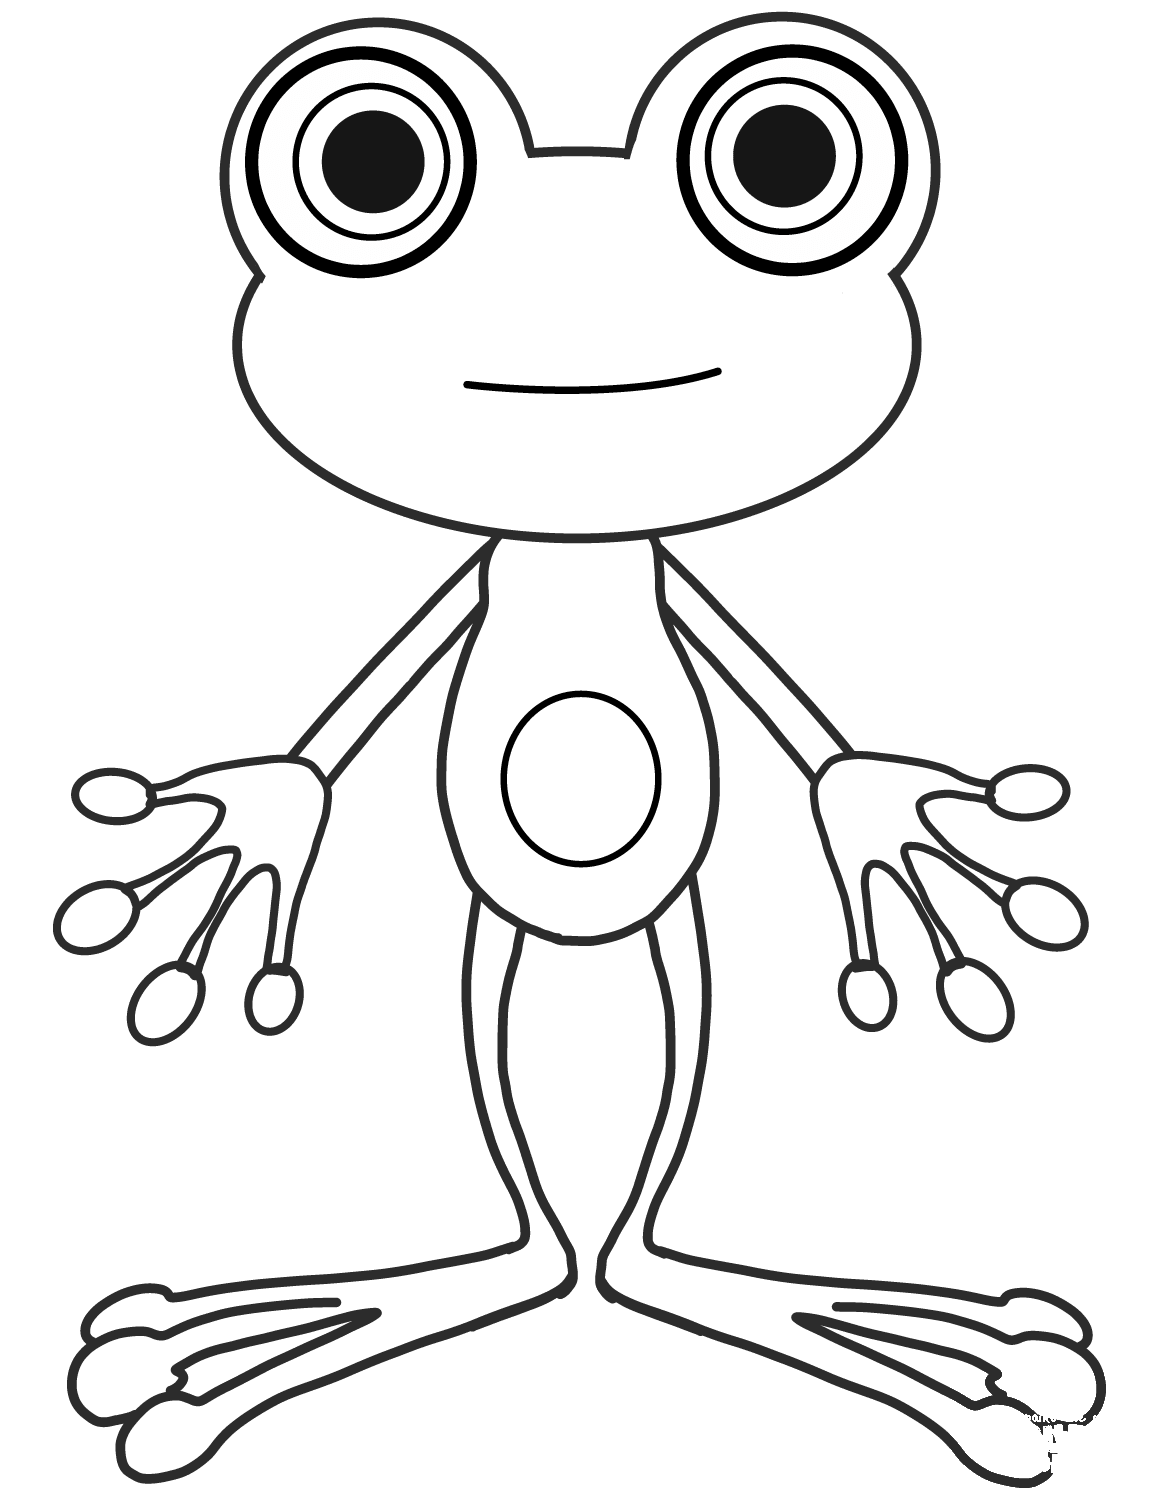 Cartoon Frog Coloring Page Colouringpages 9456